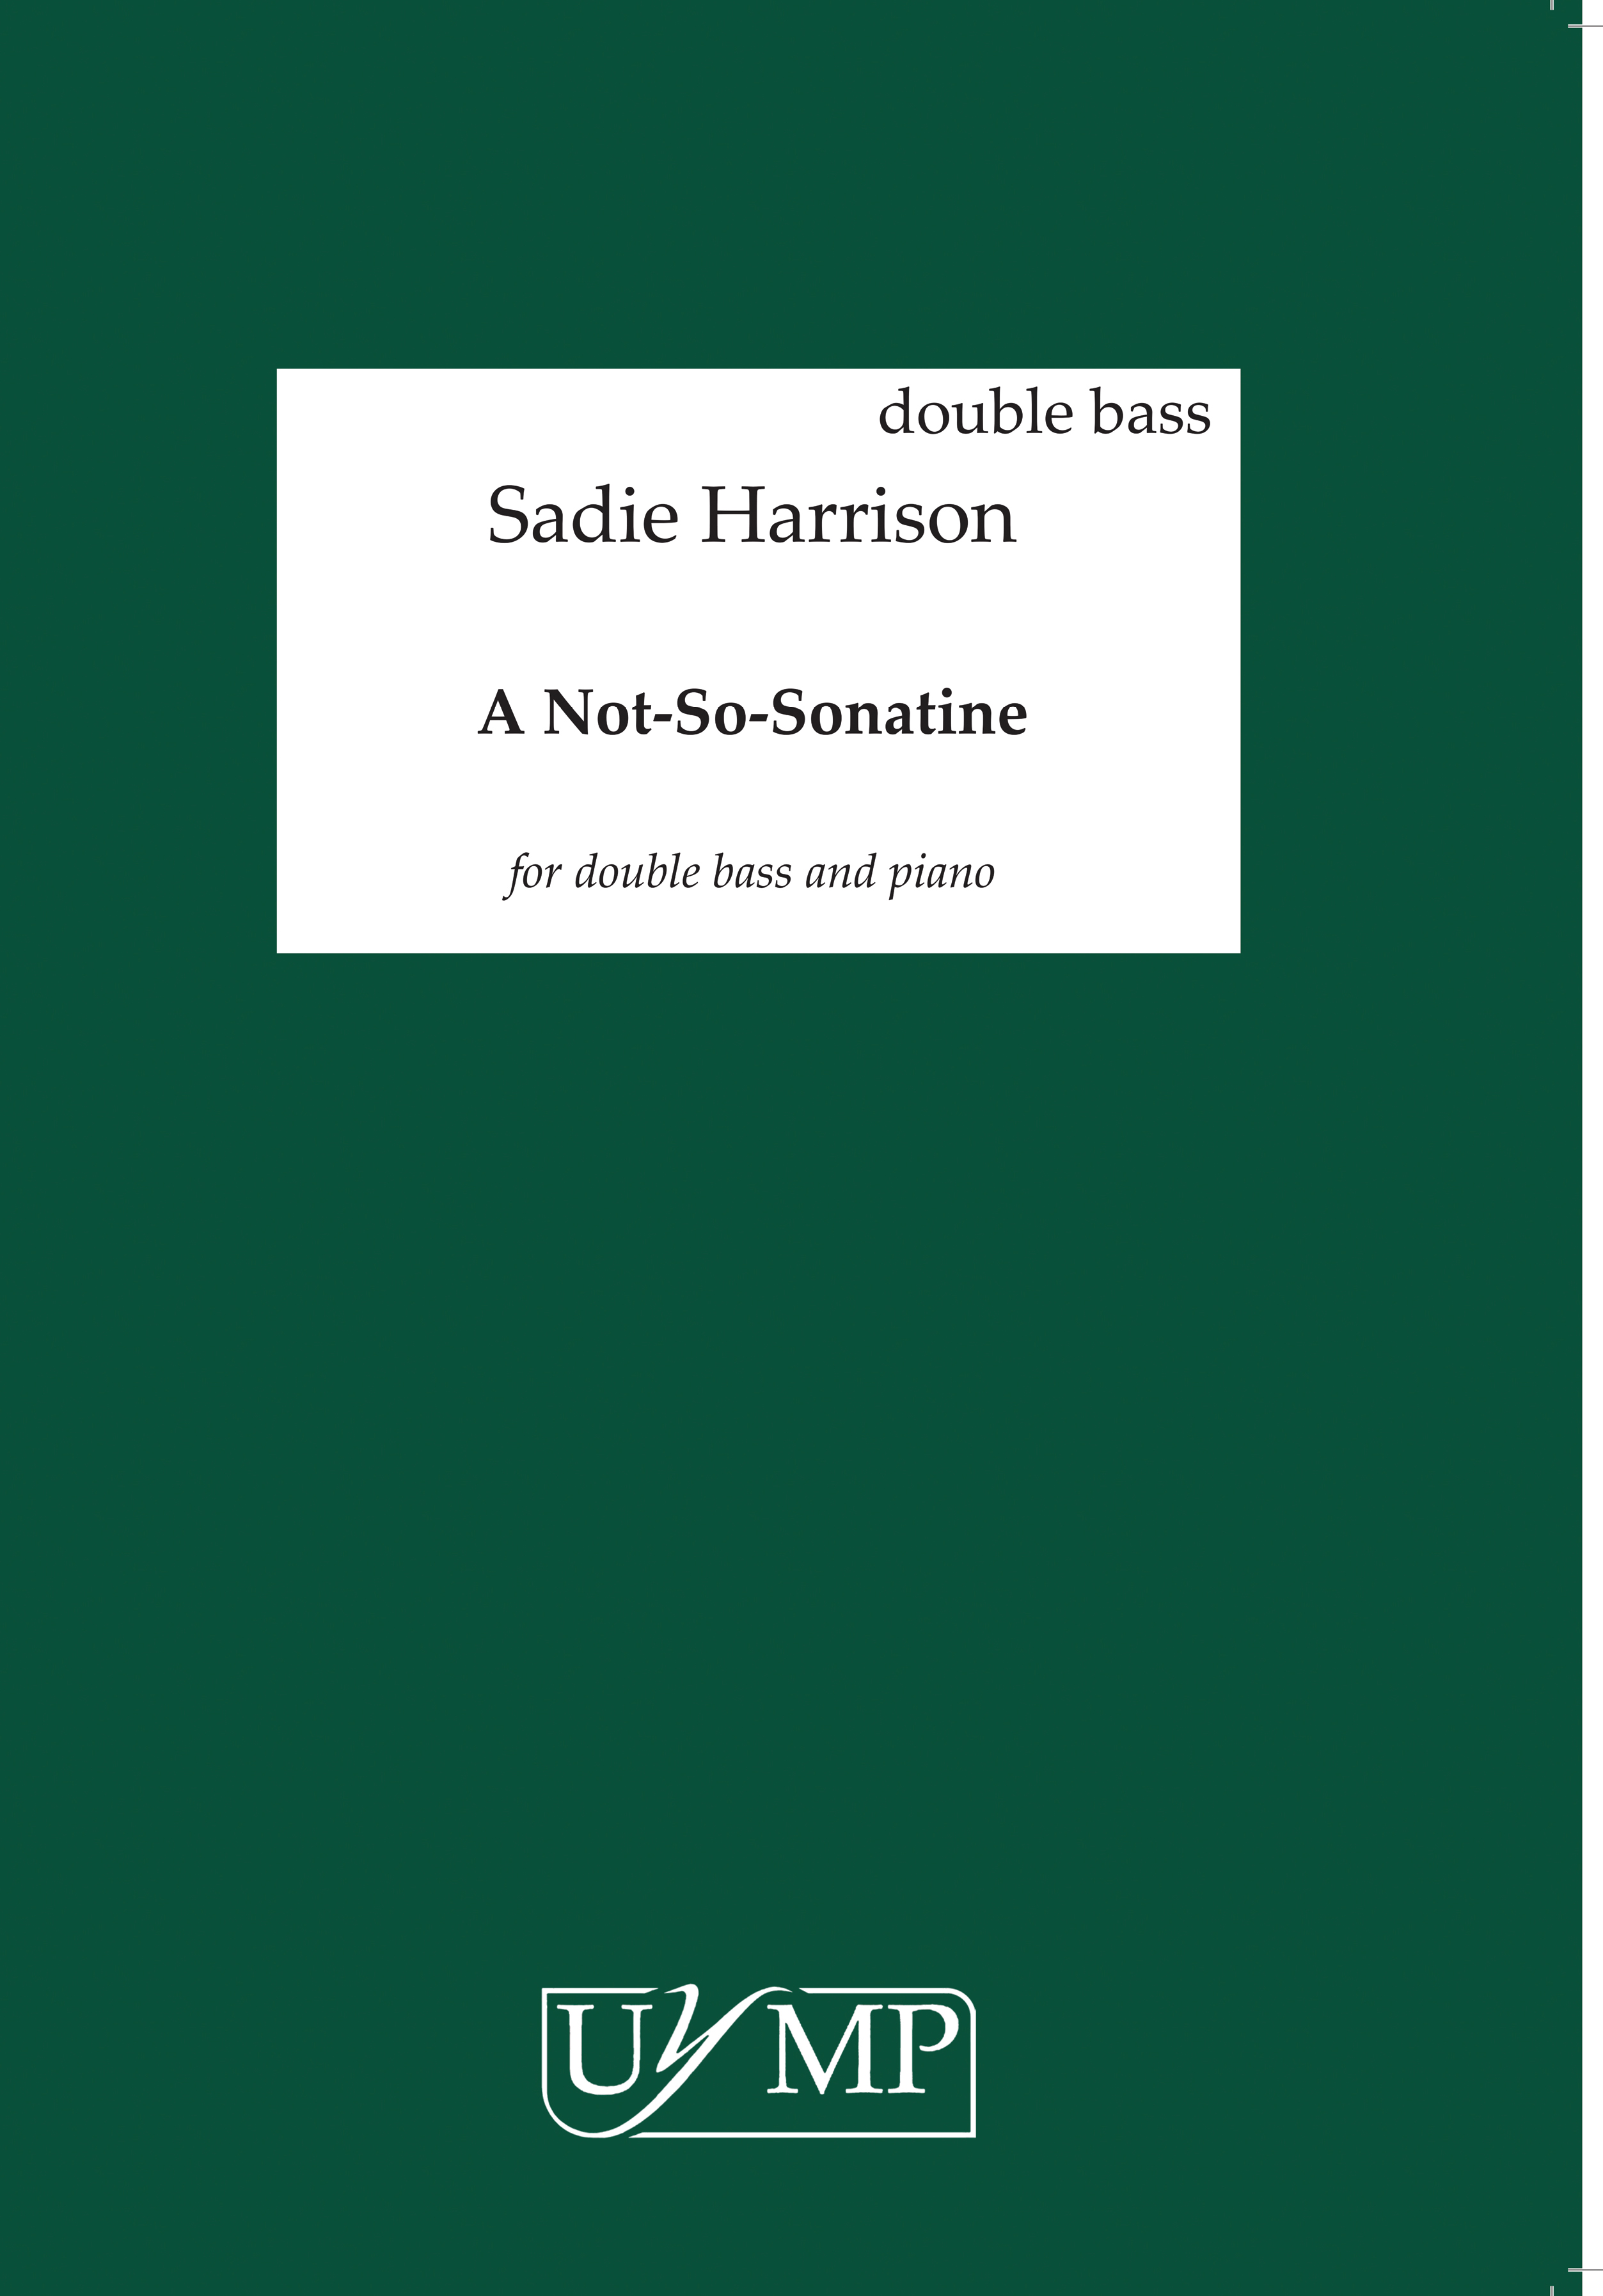 Sadie Harrison: A Not-So-Sonatine: Double Bass: Score and Parts